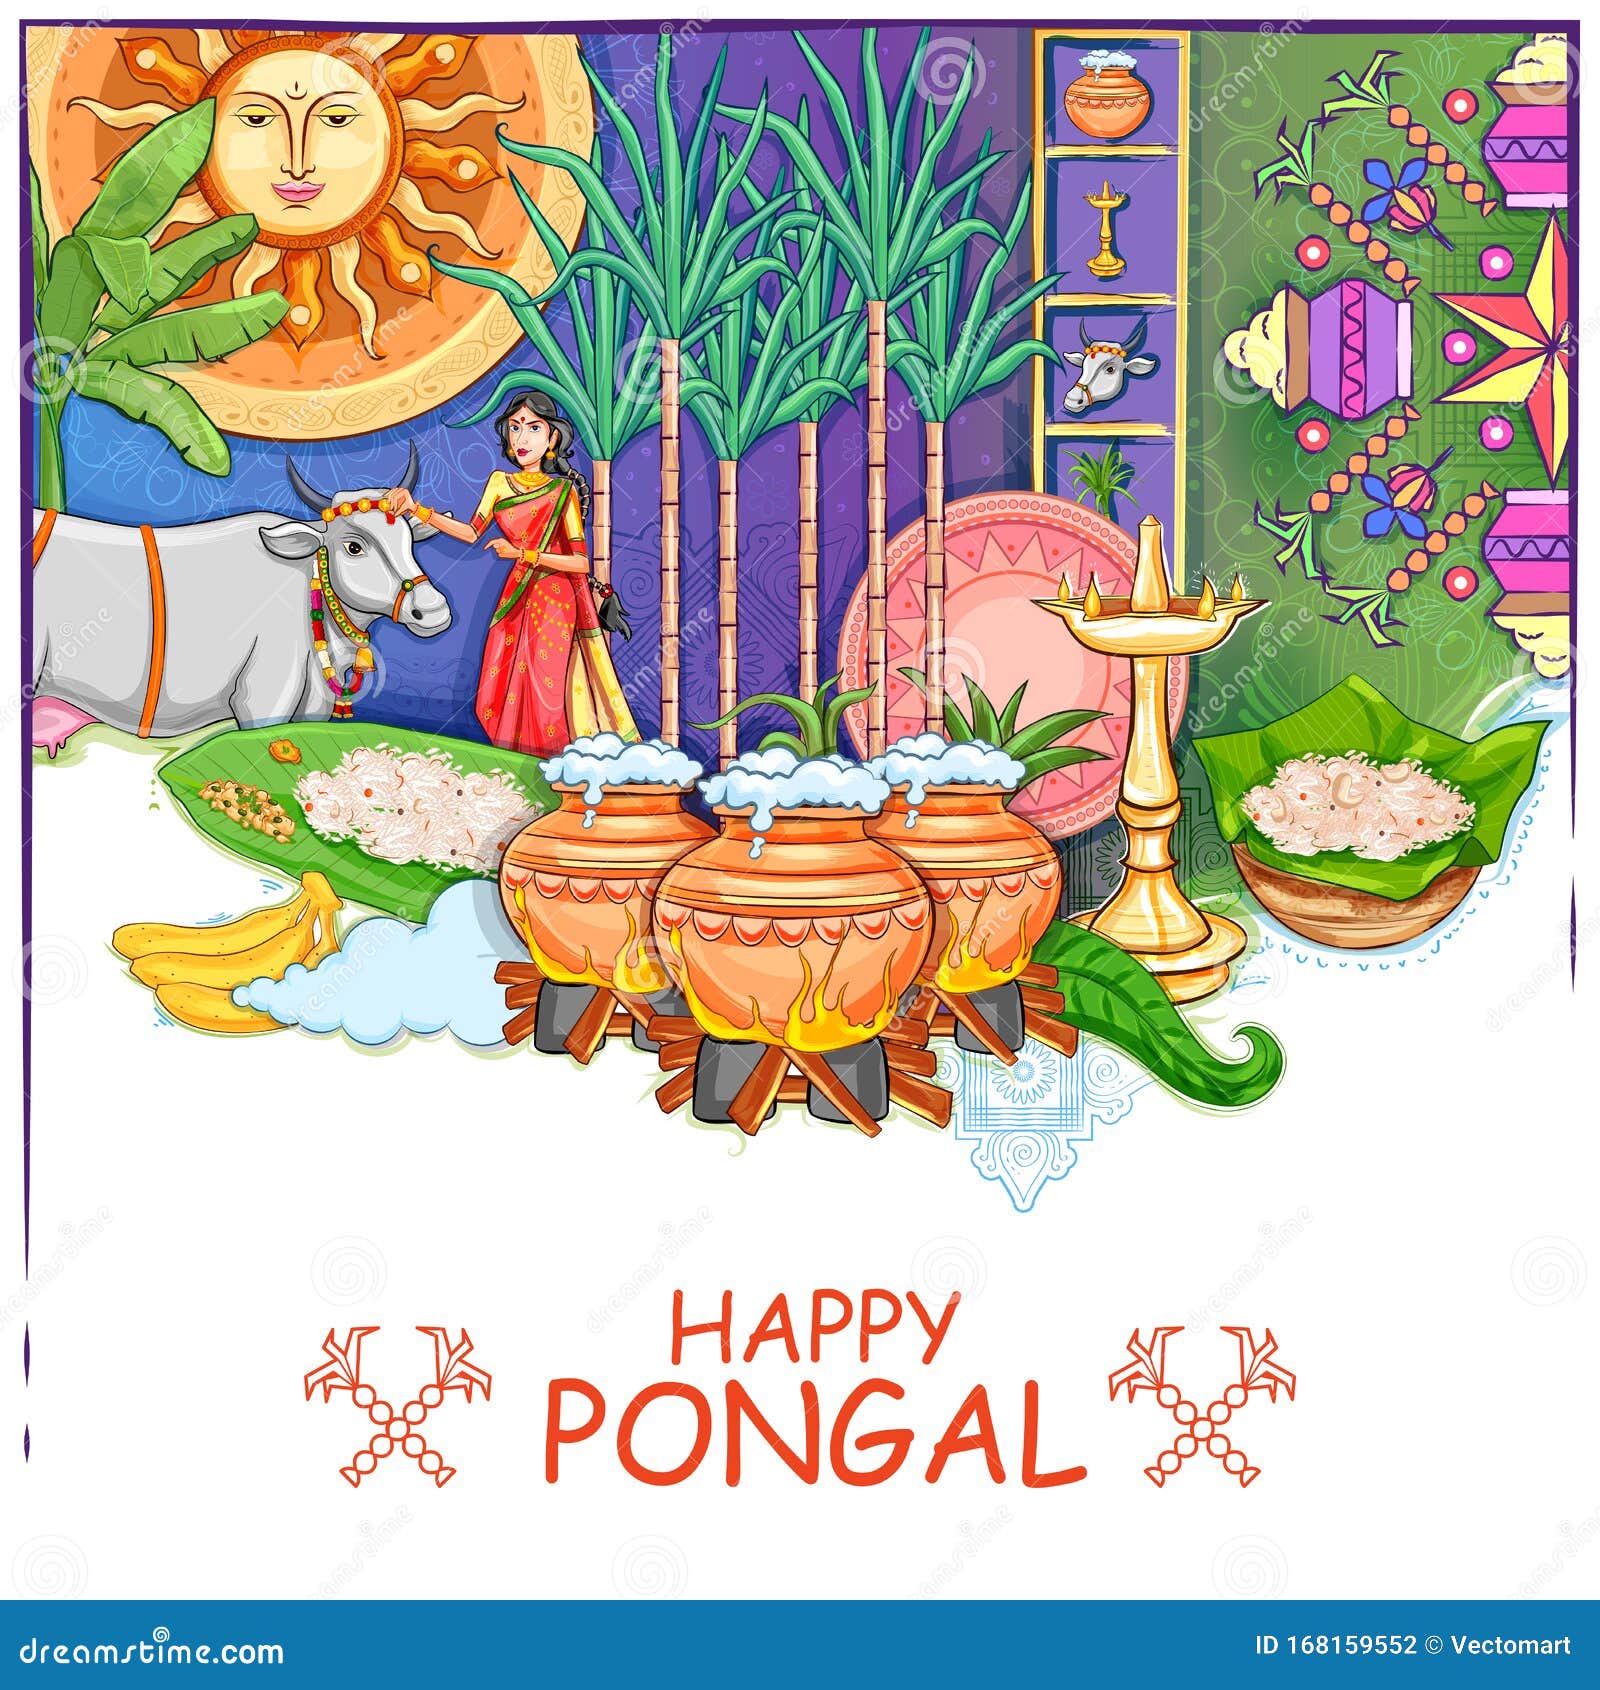 Ven Pongal: Over 32 Royalty-Free Licensable Stock Illustrations & Drawings  | Shutterstock